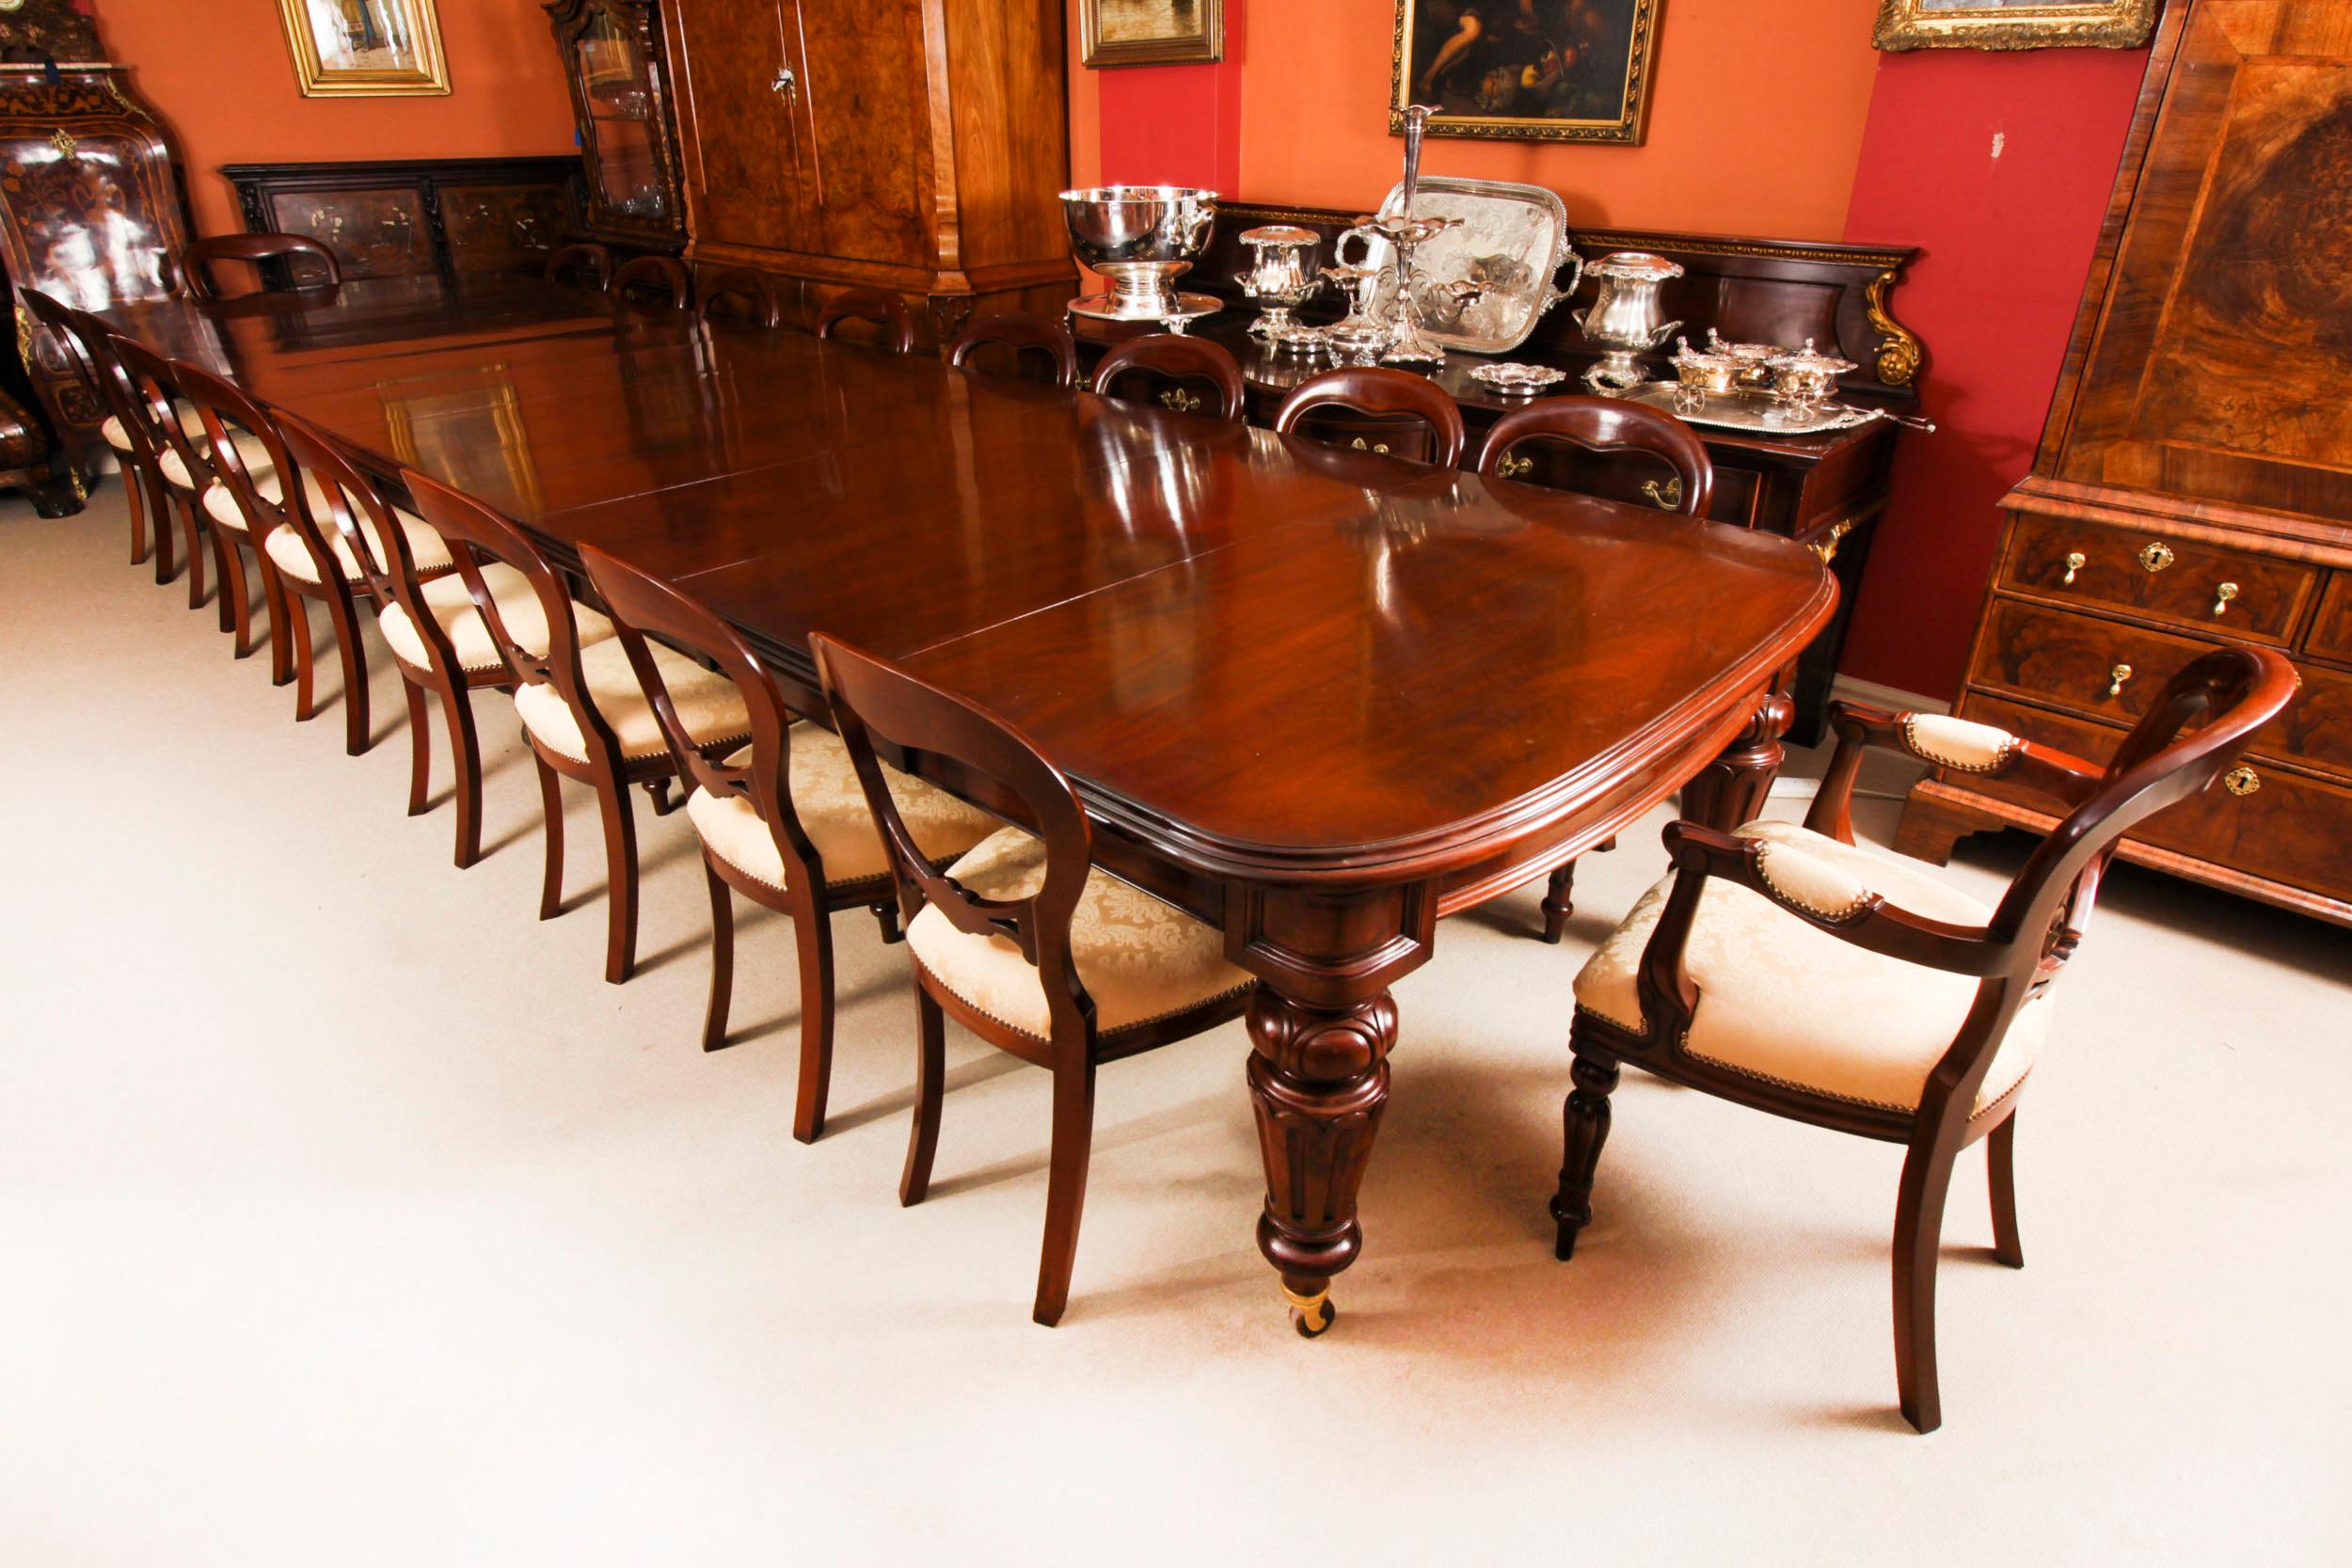 This is a magnificent antique William IV flame mahogany dining table which can comfortably seat eighteen and is also ideal for use as a conference table, C1830 in date.

This beautiful table is in stunning solid  flame mahogany and has eight  leaves